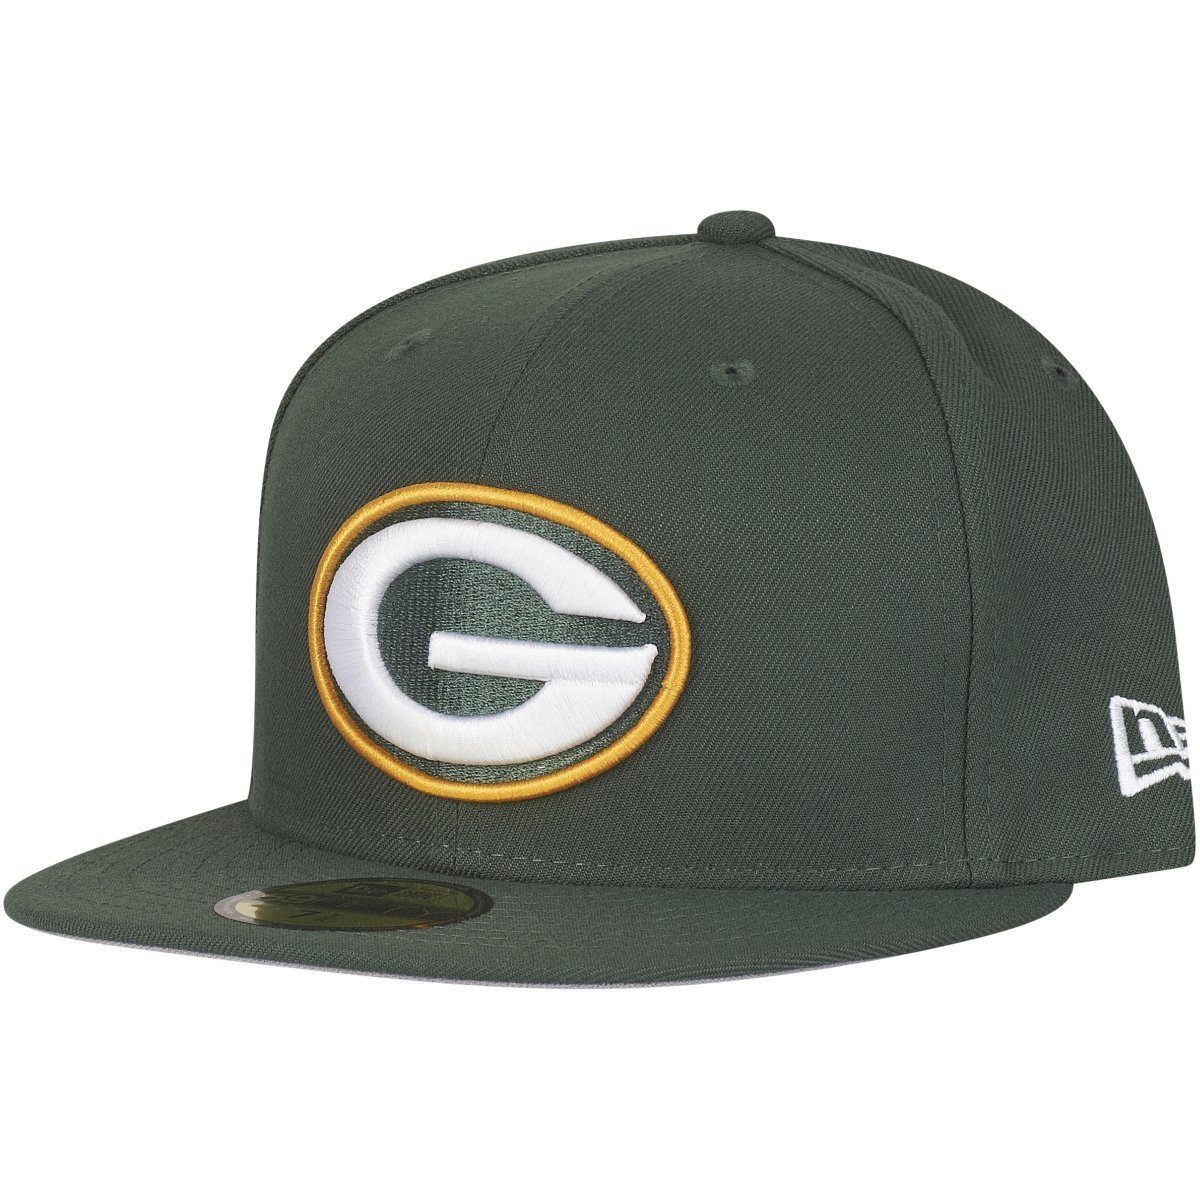 New Era Fitted Cap 59Fifty ON celtic NFL Green FIELD Bay Packers